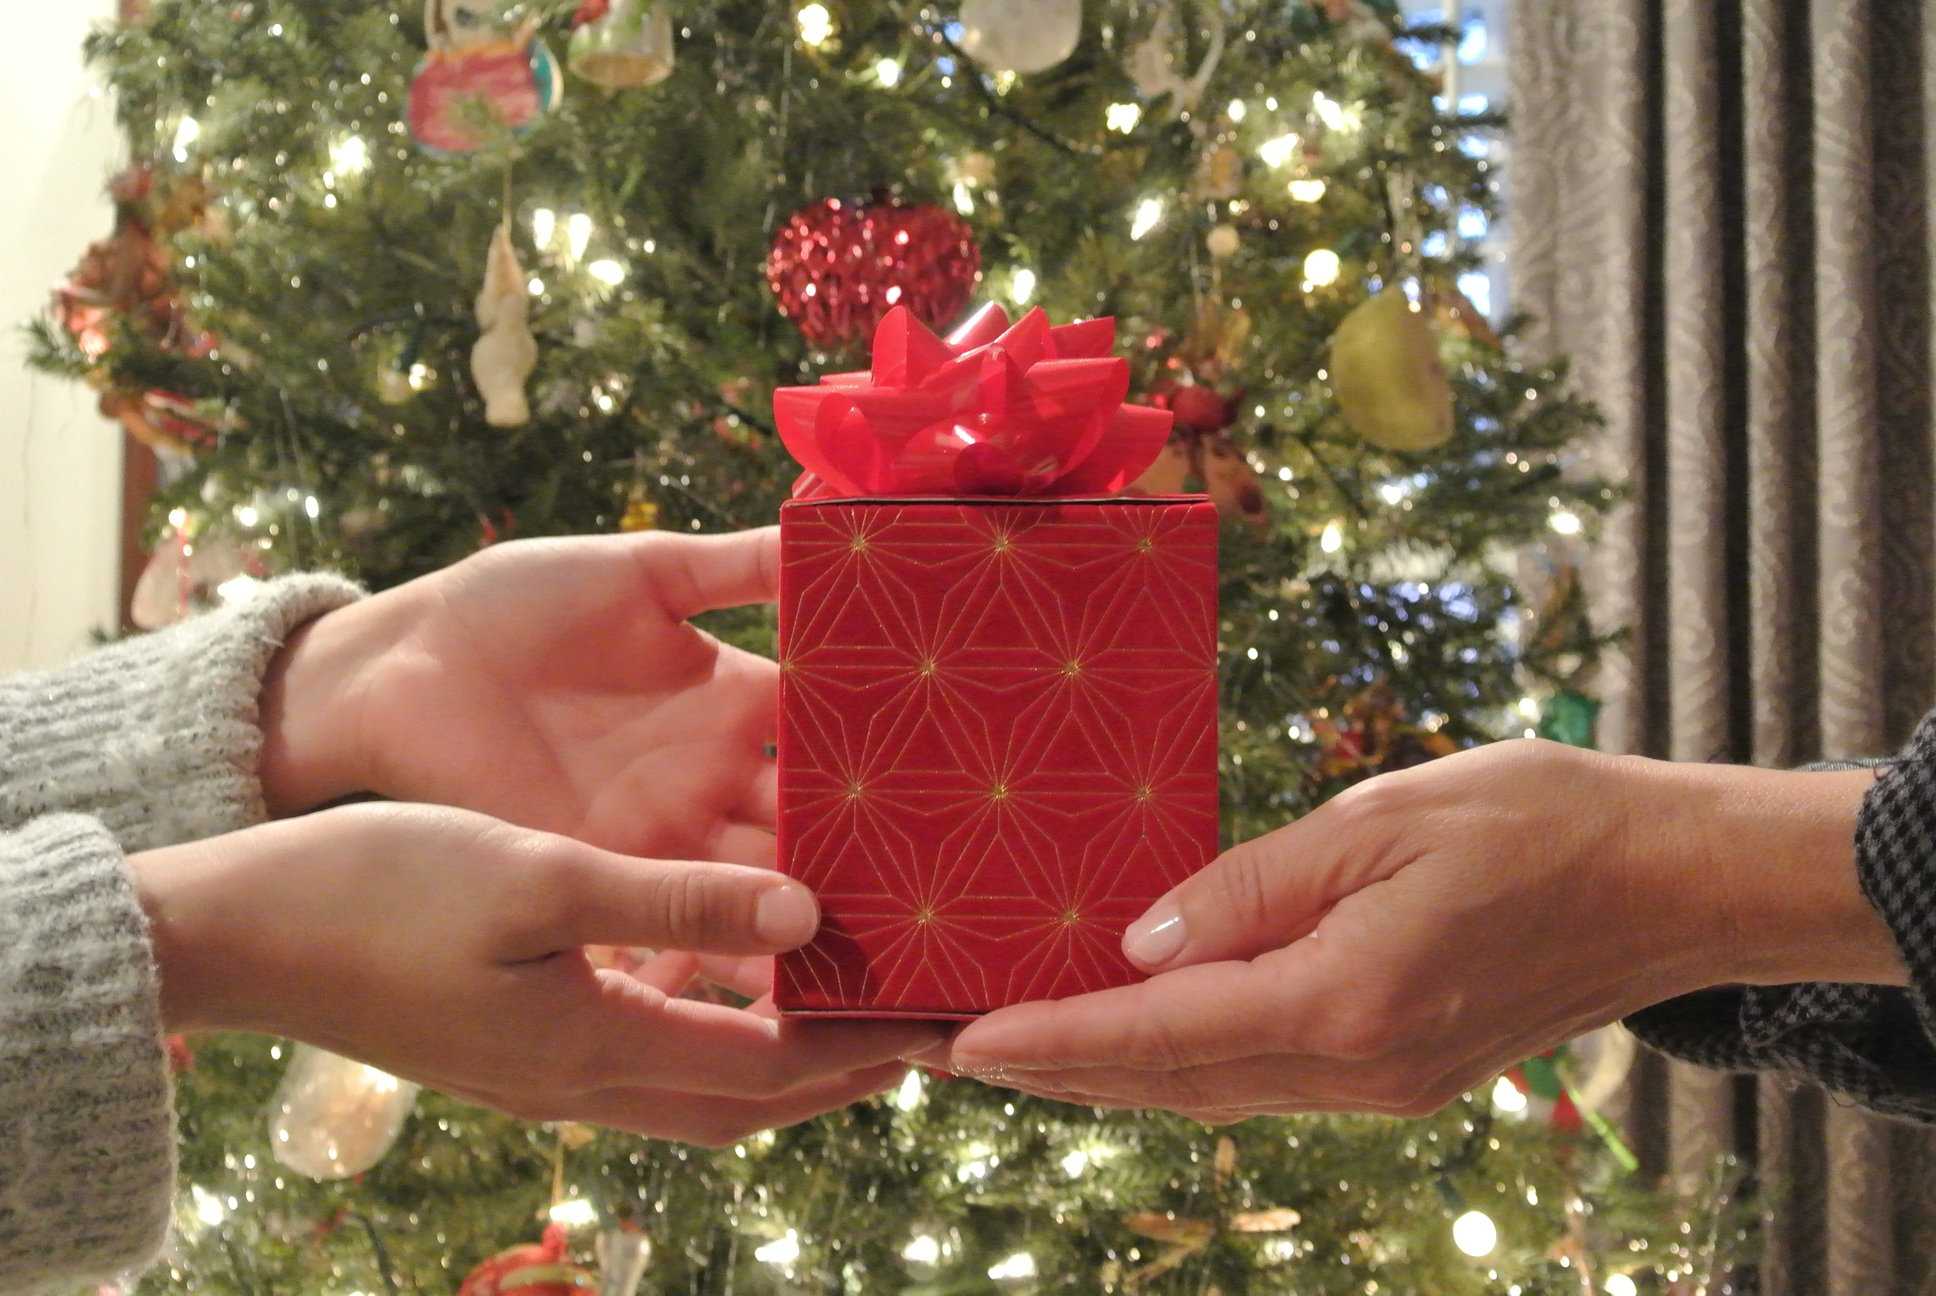 Which is Better: Giving or Getting Gifts?